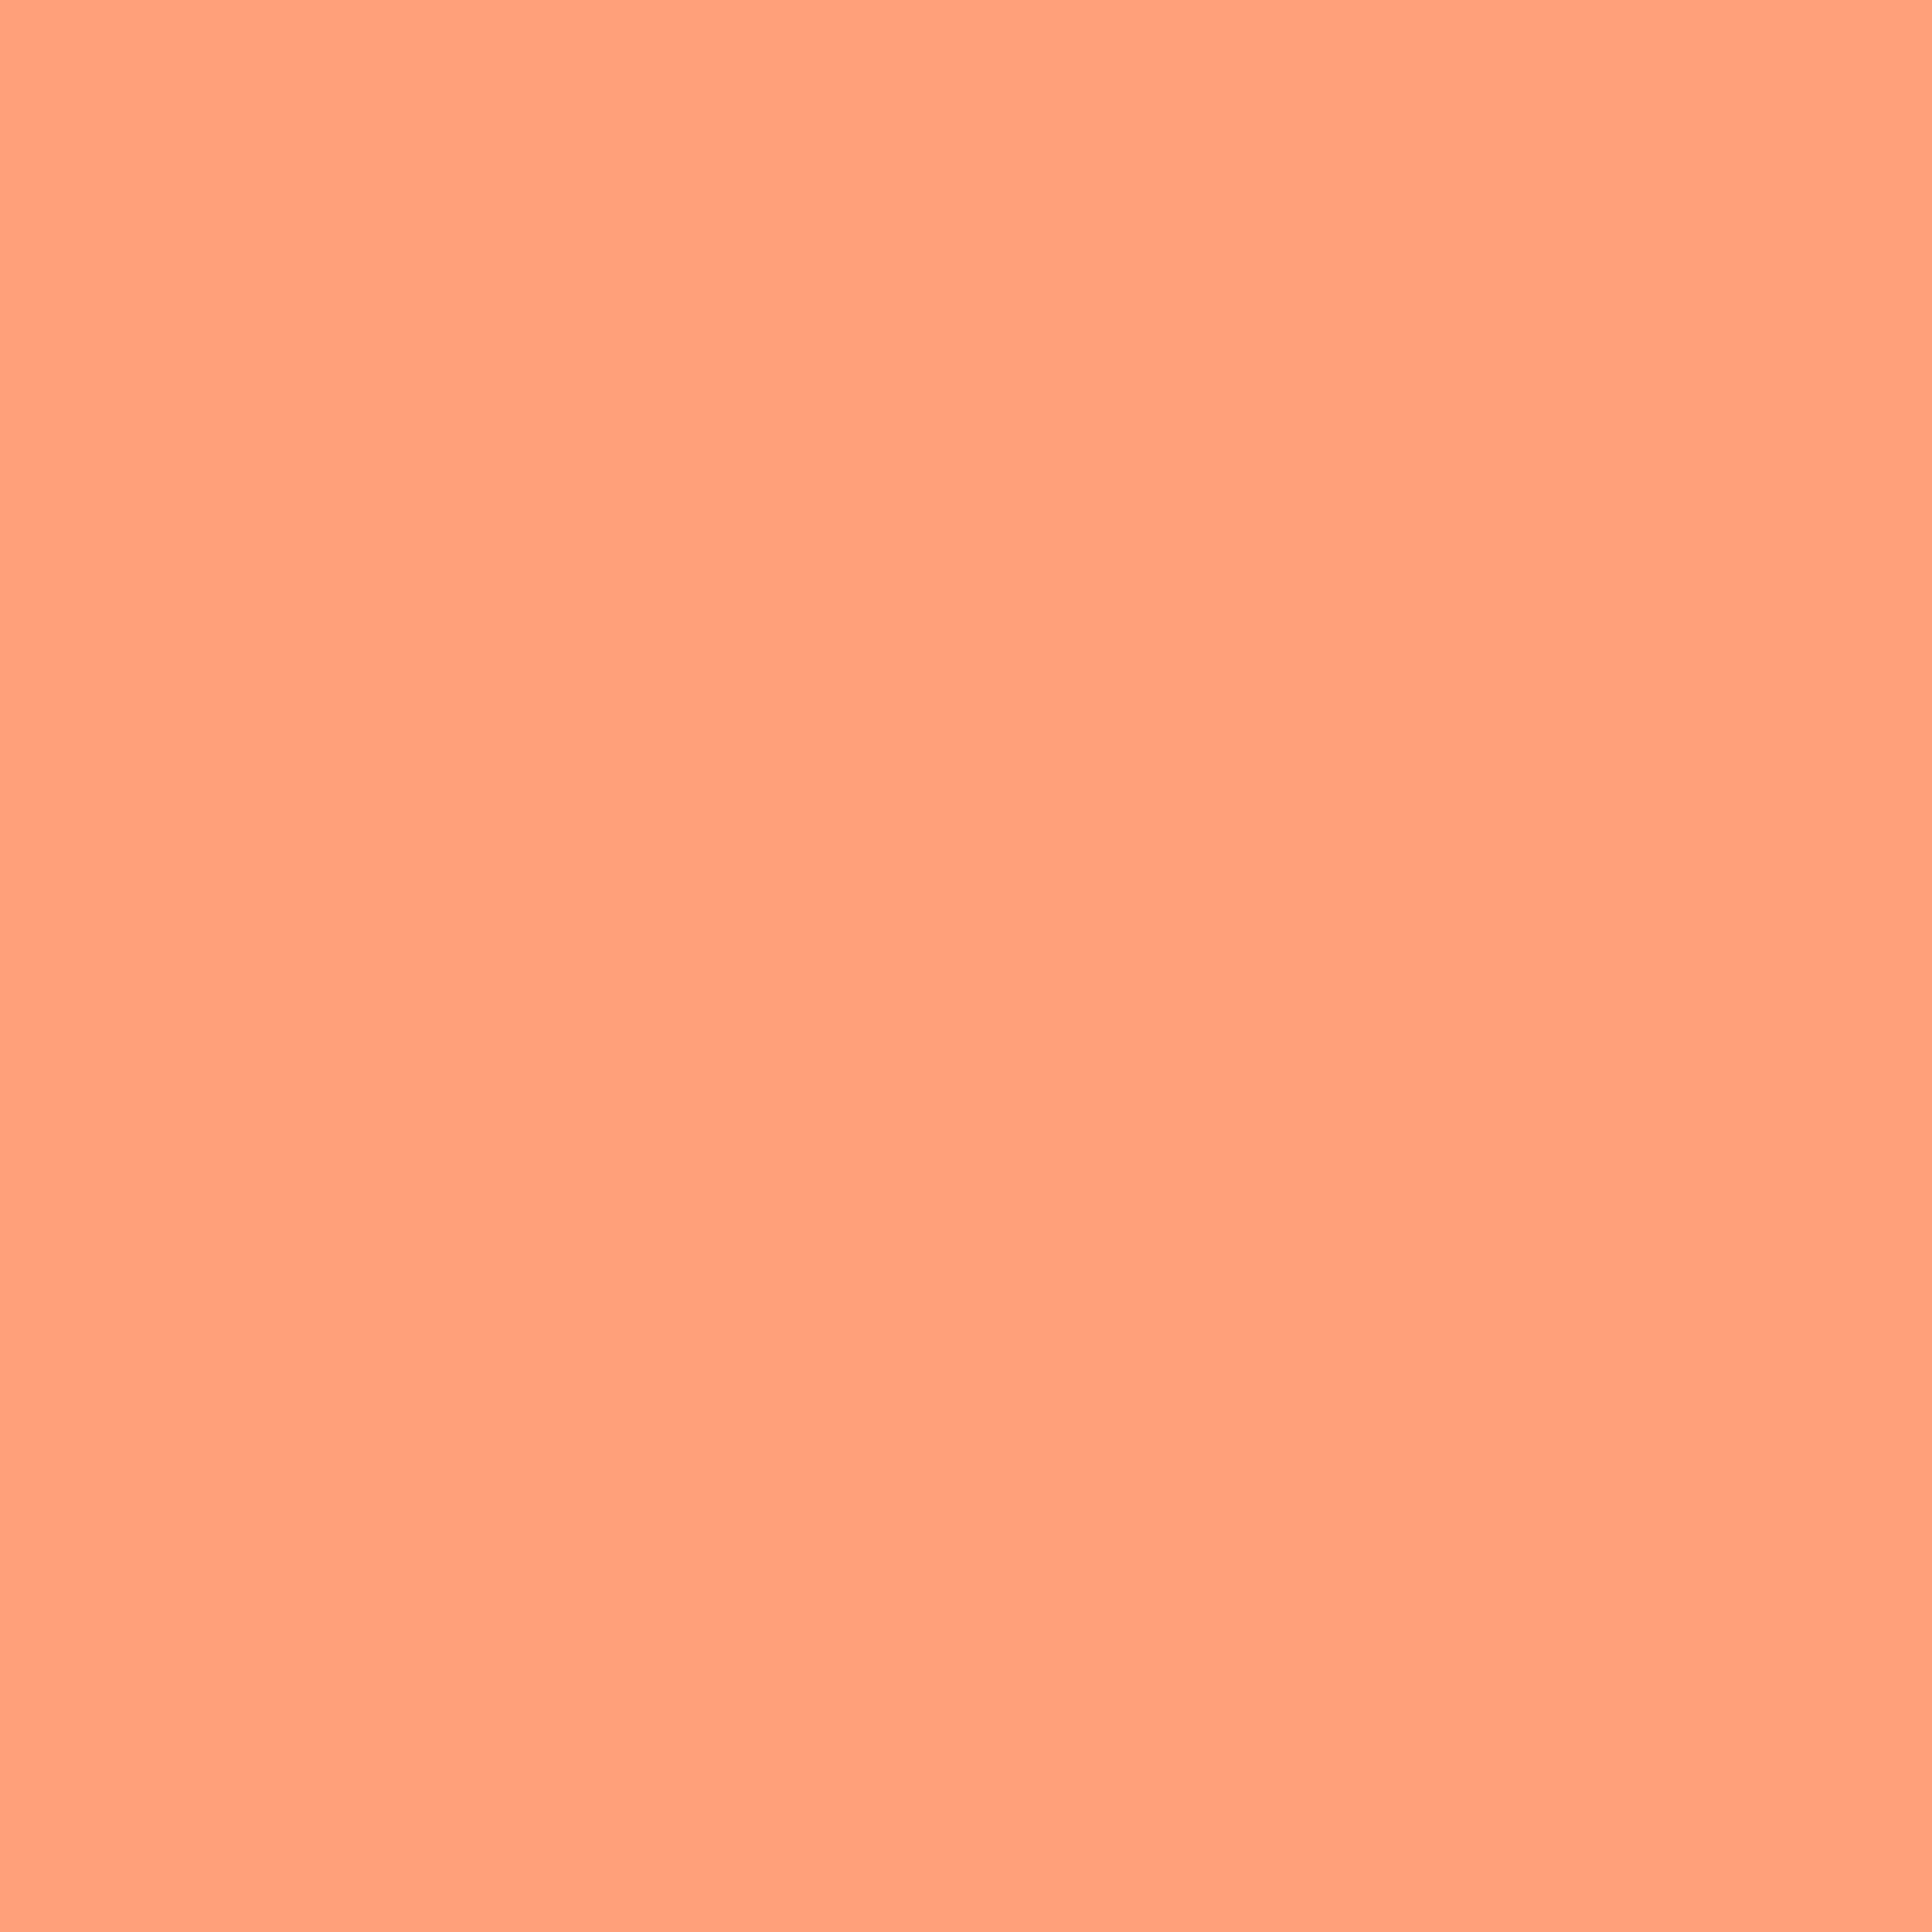 2048x2048 Light Salmon Solid Color Background